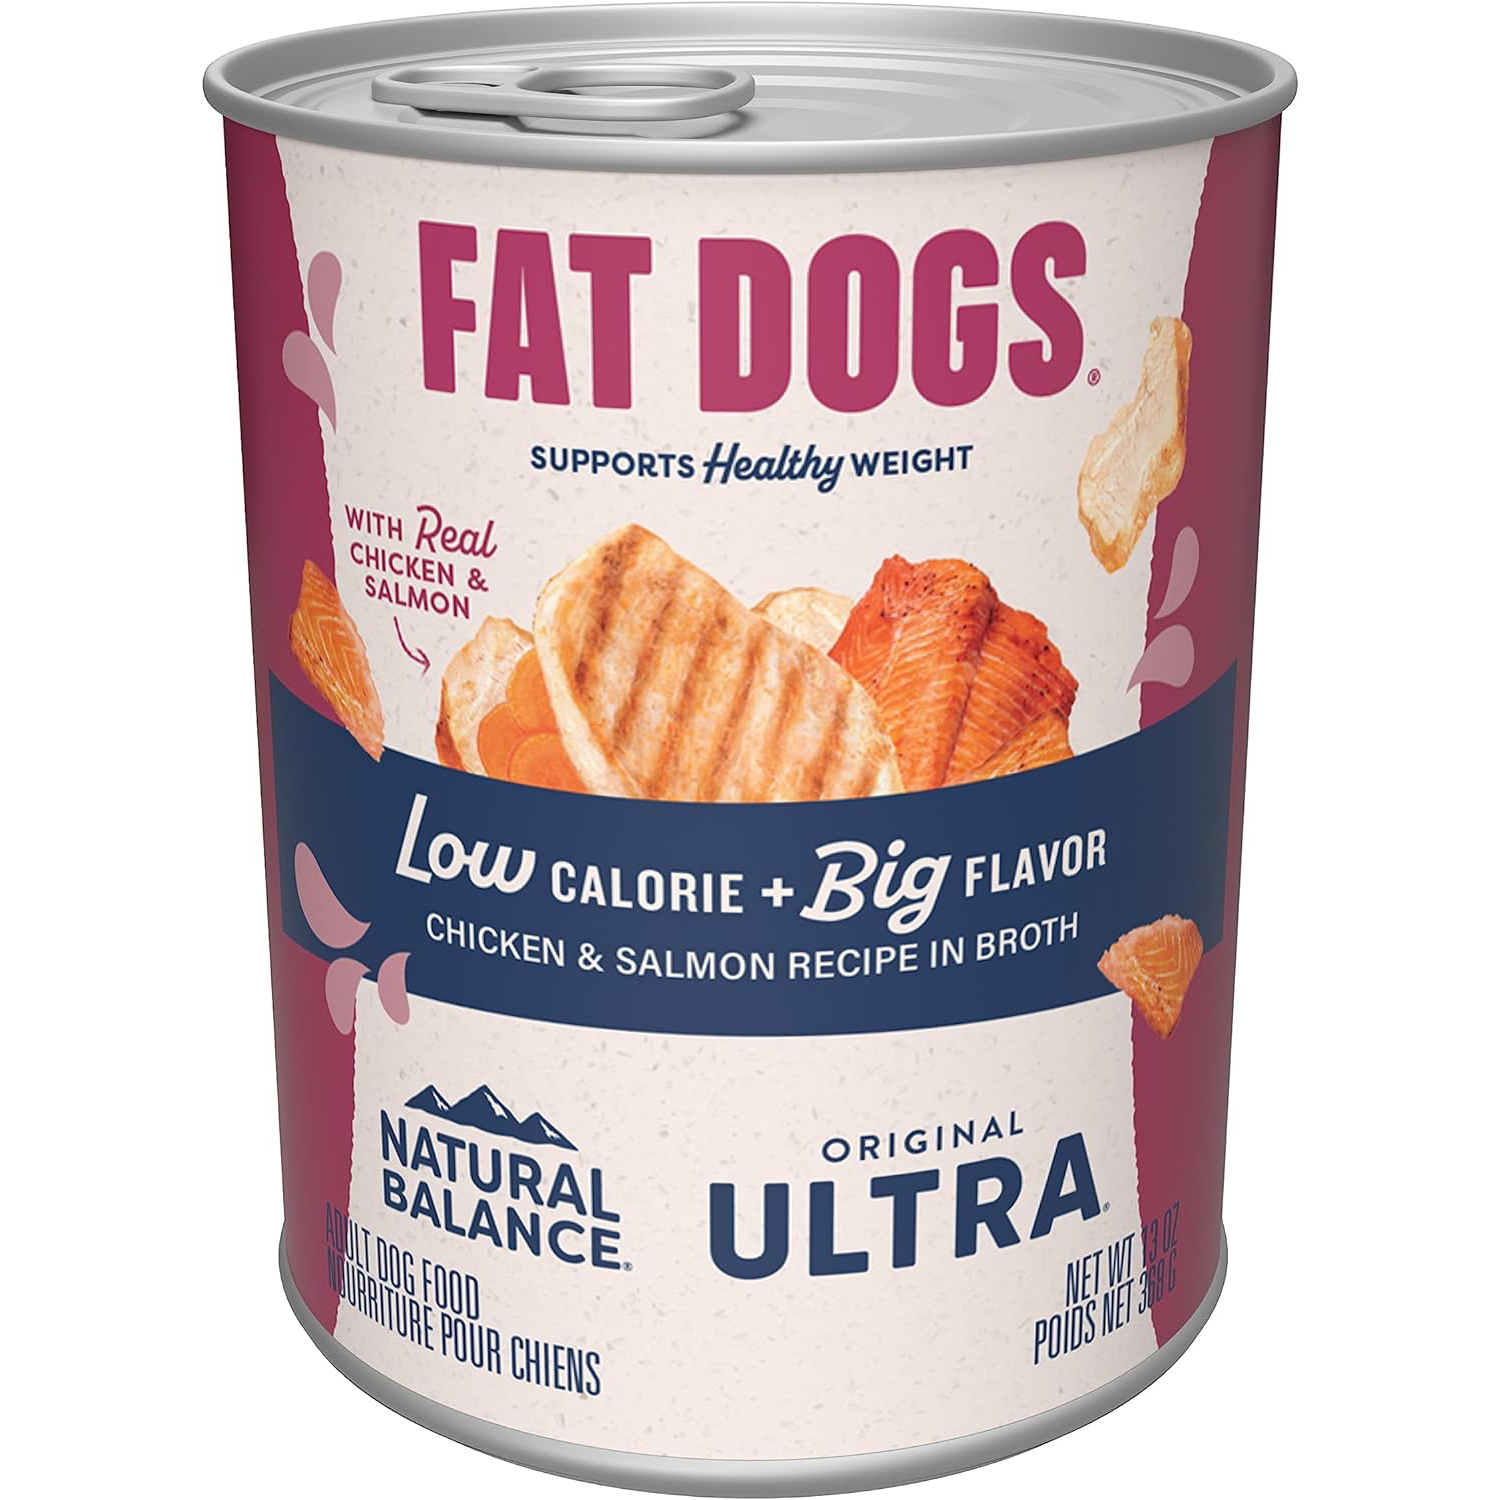 Natural Balance Original Ultra Fat Dogs Adult Low Calorie Wet Dog Food for Overweight Dogs